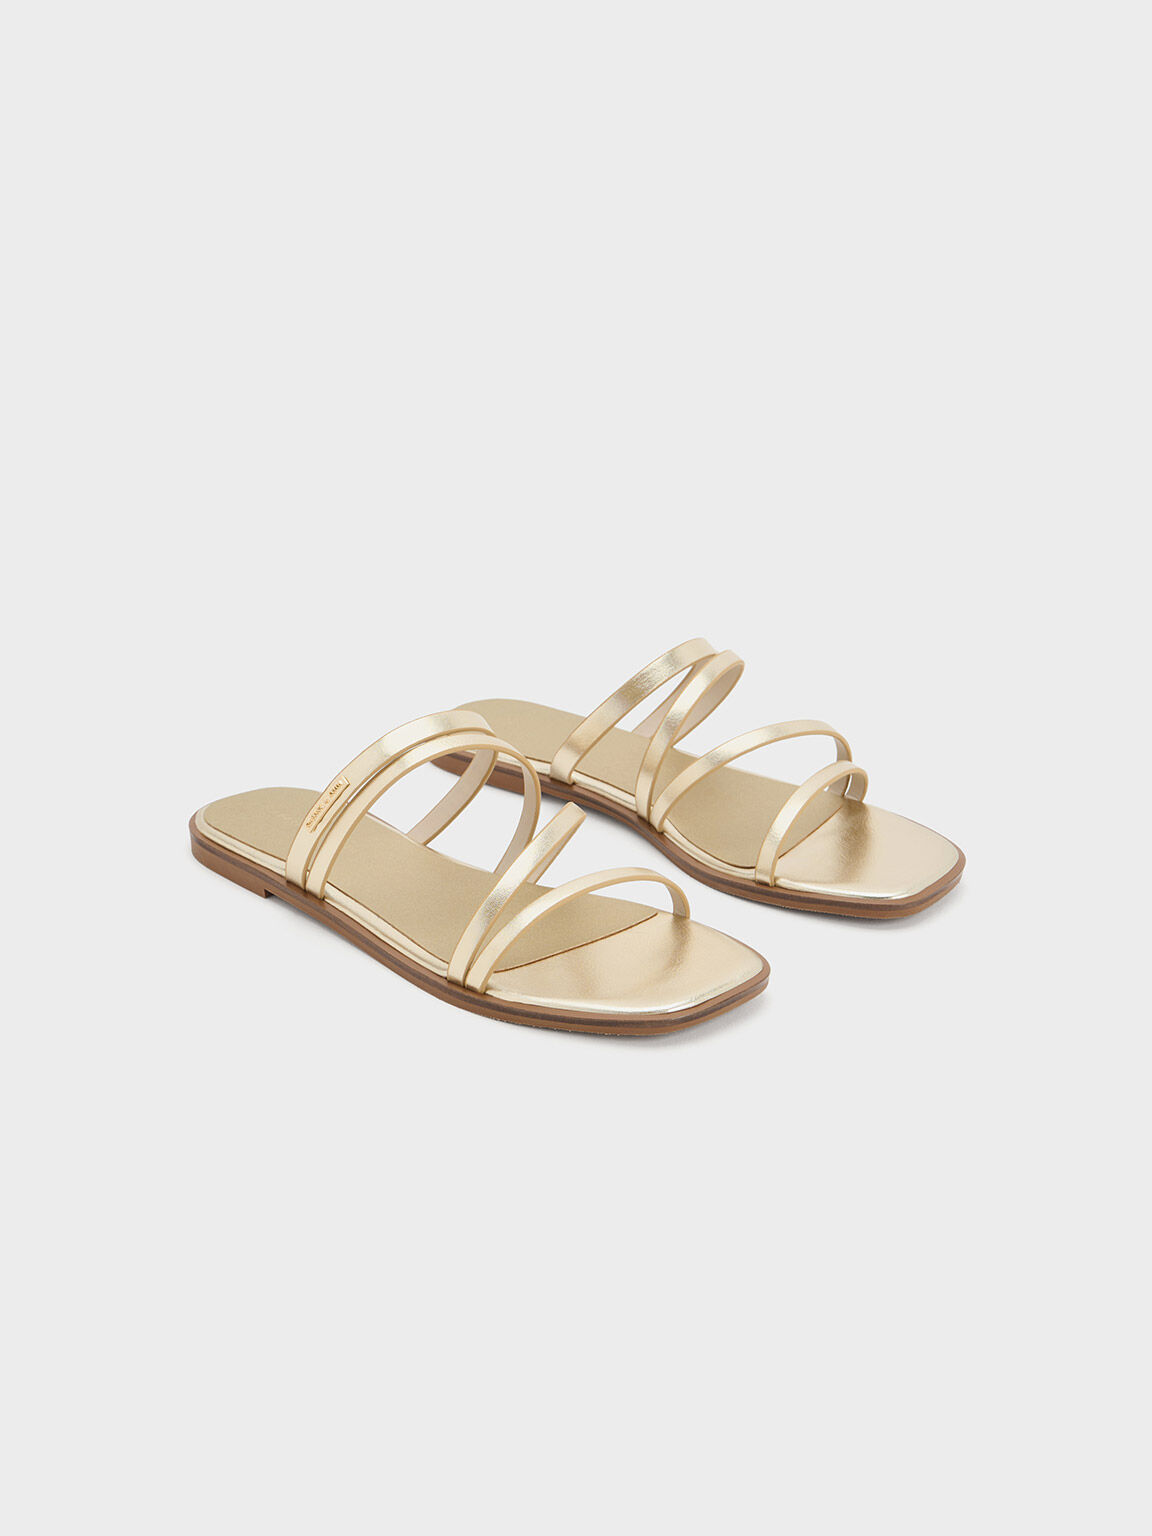 Buy Gold Leather Strappy Sandals With Meanders Classy Ancient Greek Sandals  Strappy Flat Slide Sandal for Women Dressy Mules Summer Shoes Online in  India - Etsy